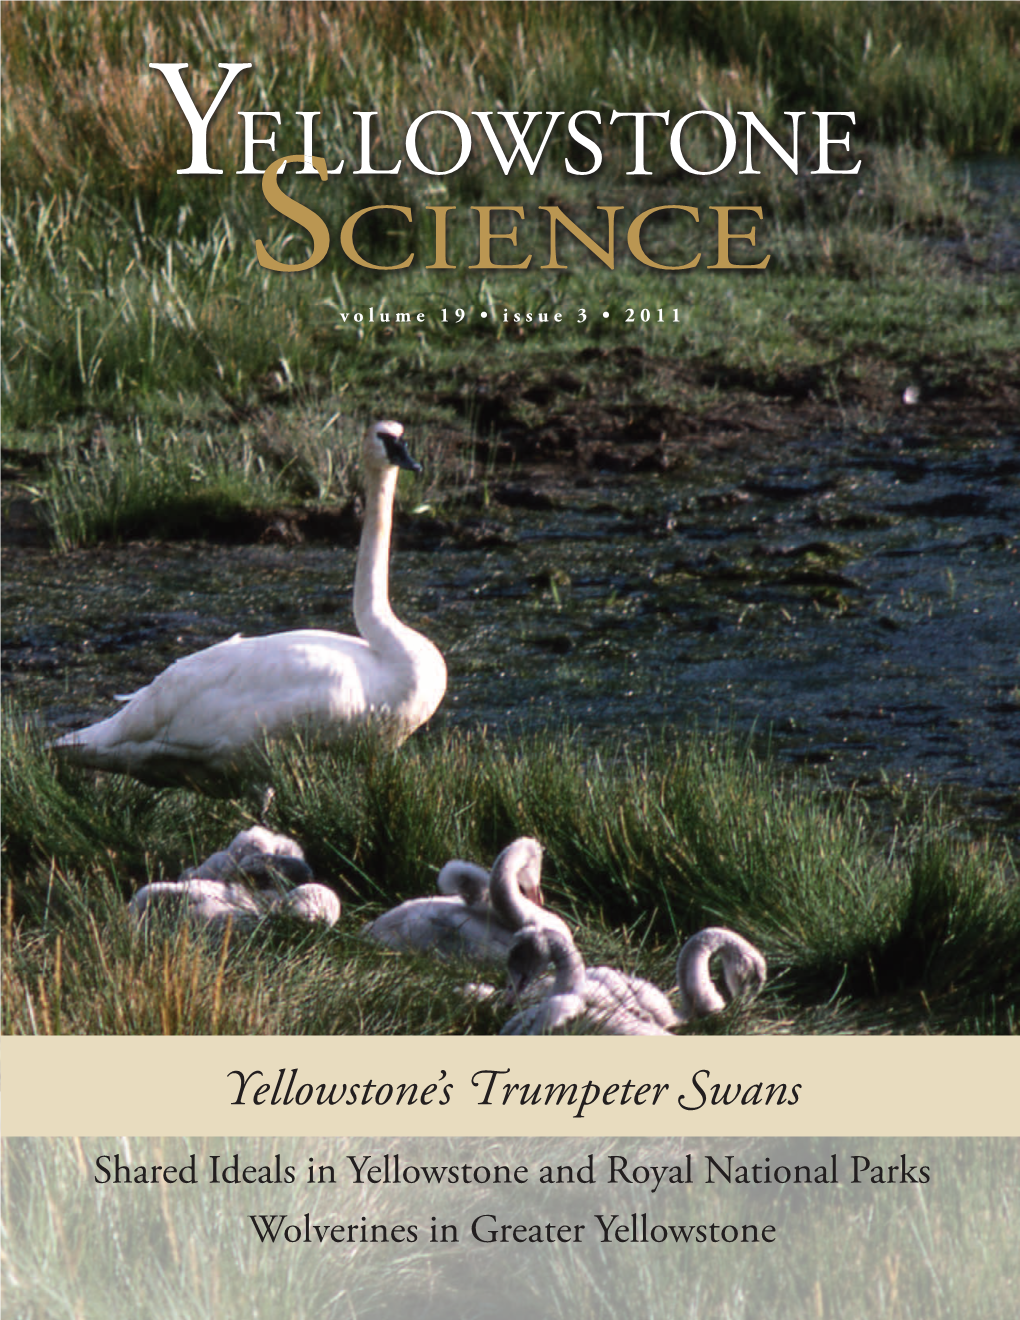 Yellowstone's Trumpeter Swans